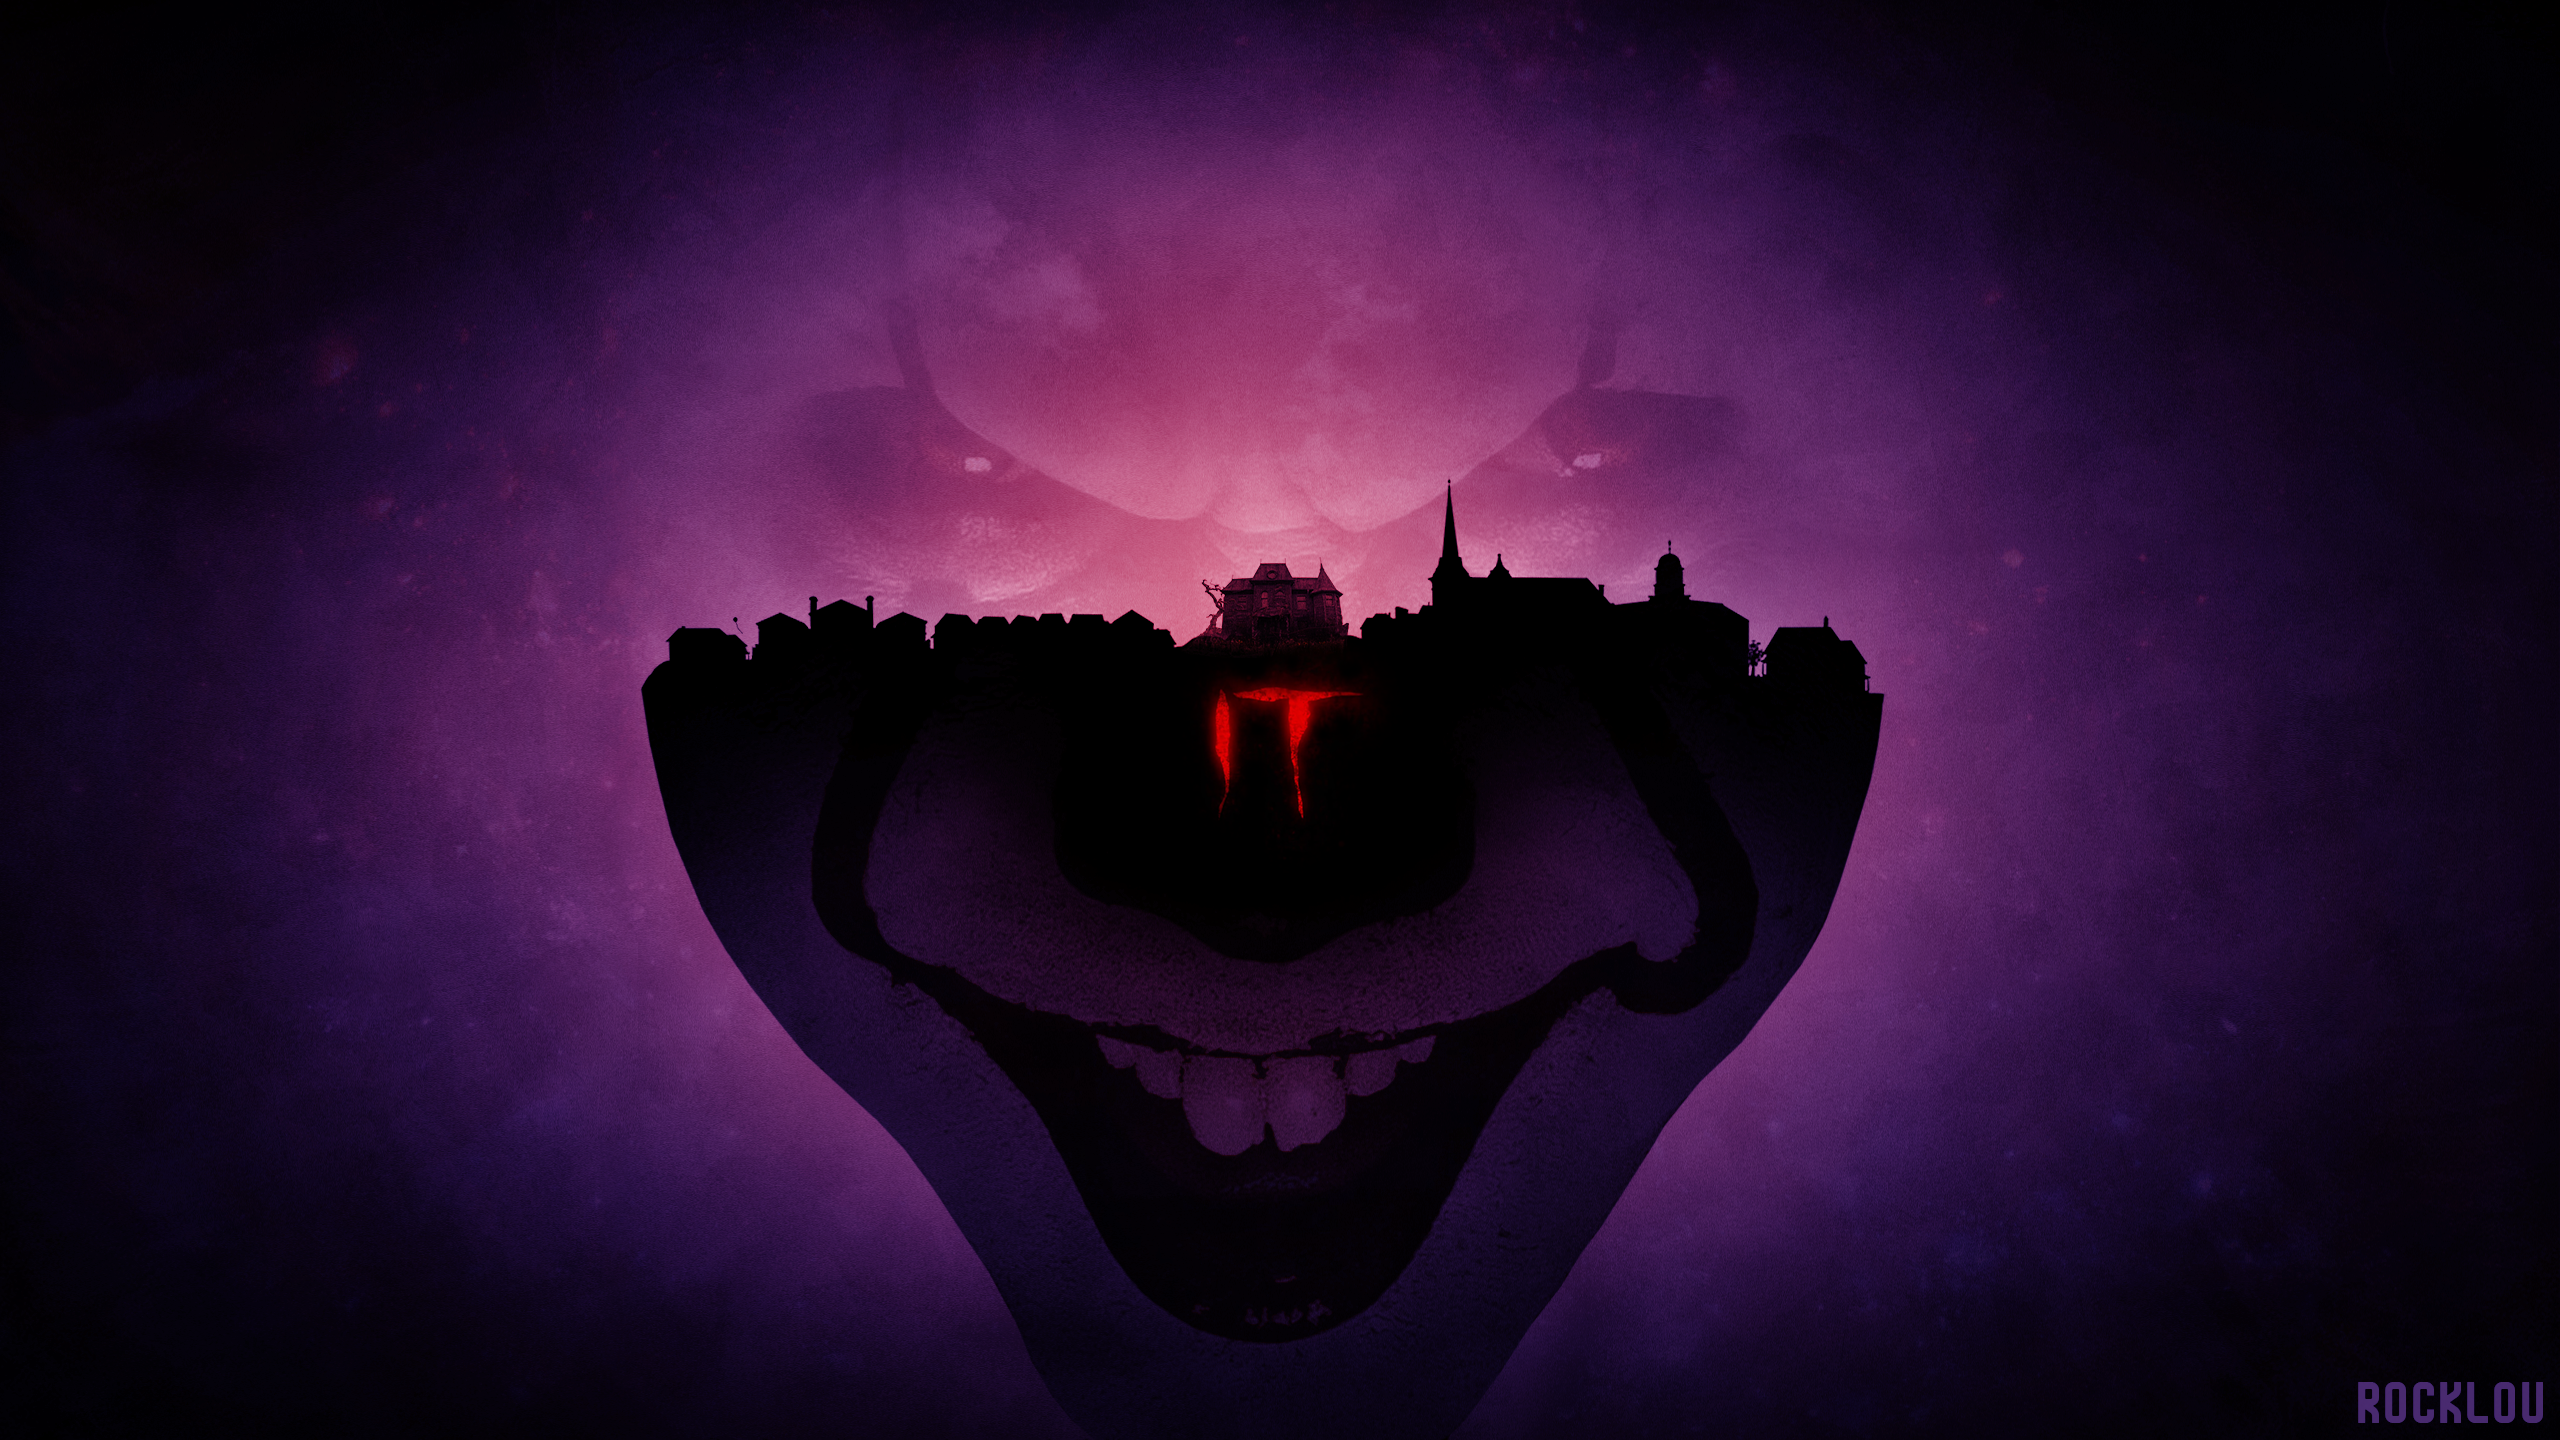 IT - Pennywise Wallpaper by RockLou on